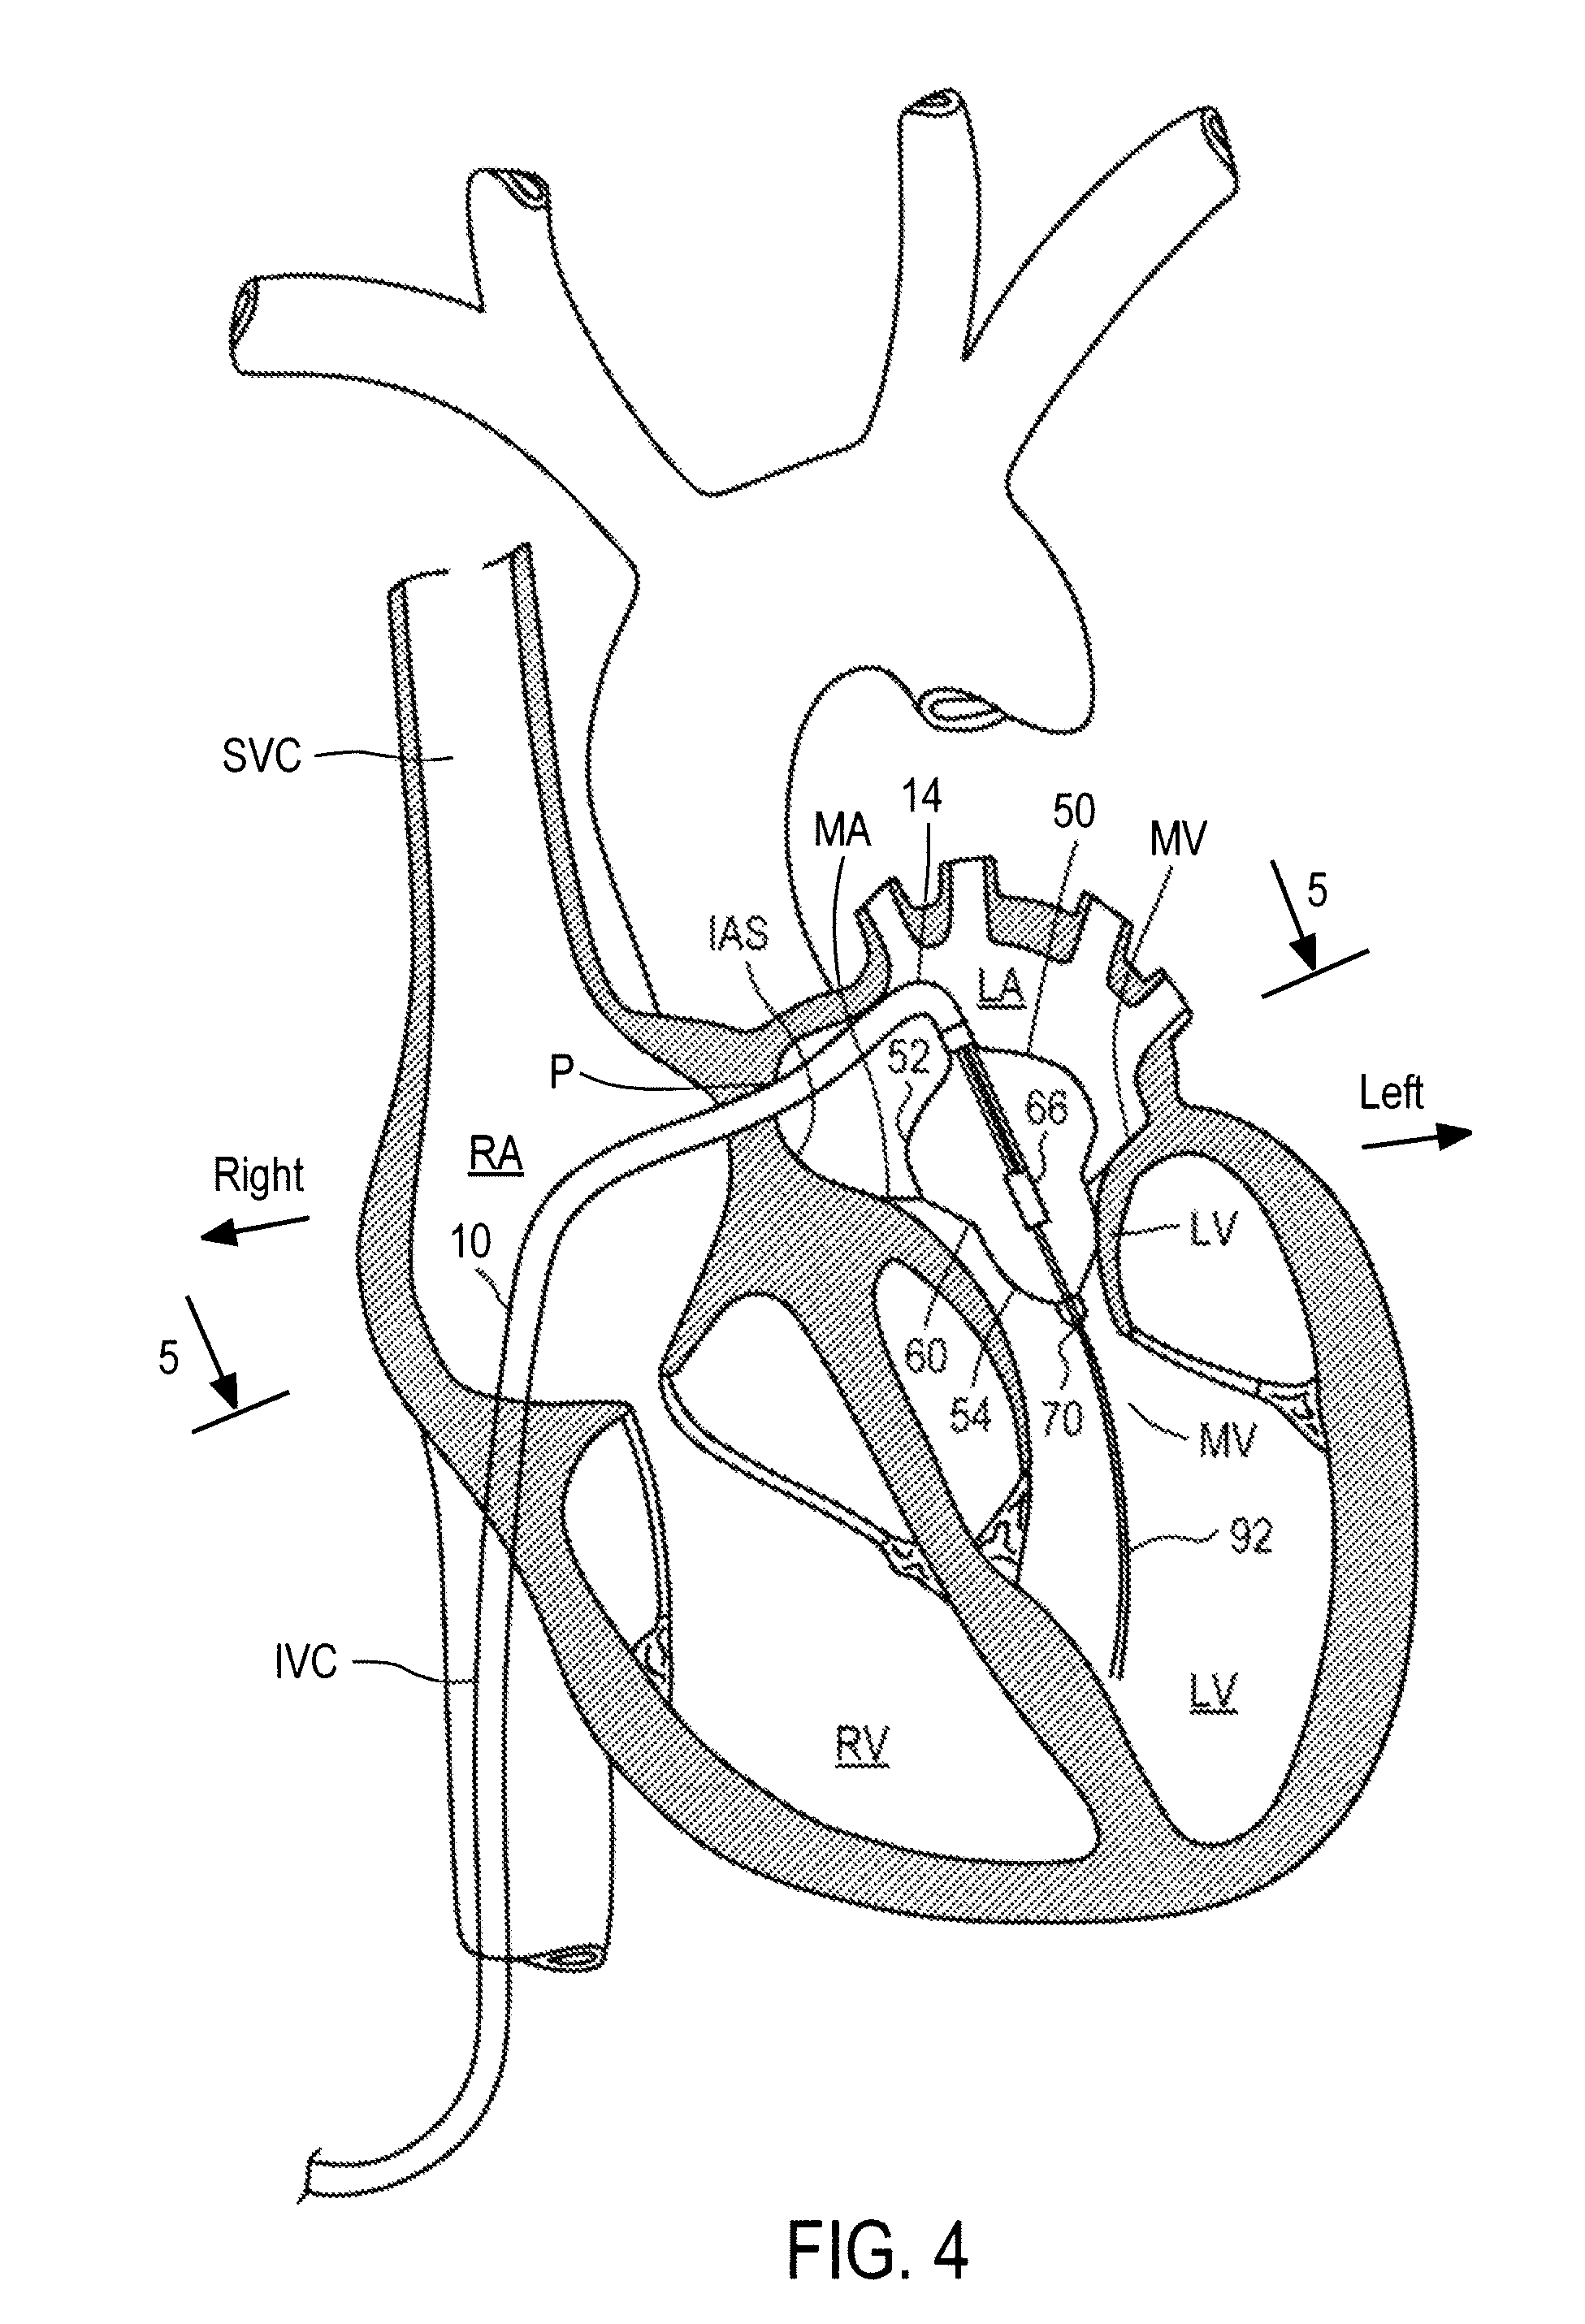 Methods and apparatus for treatment of cardiac valve insufficiency